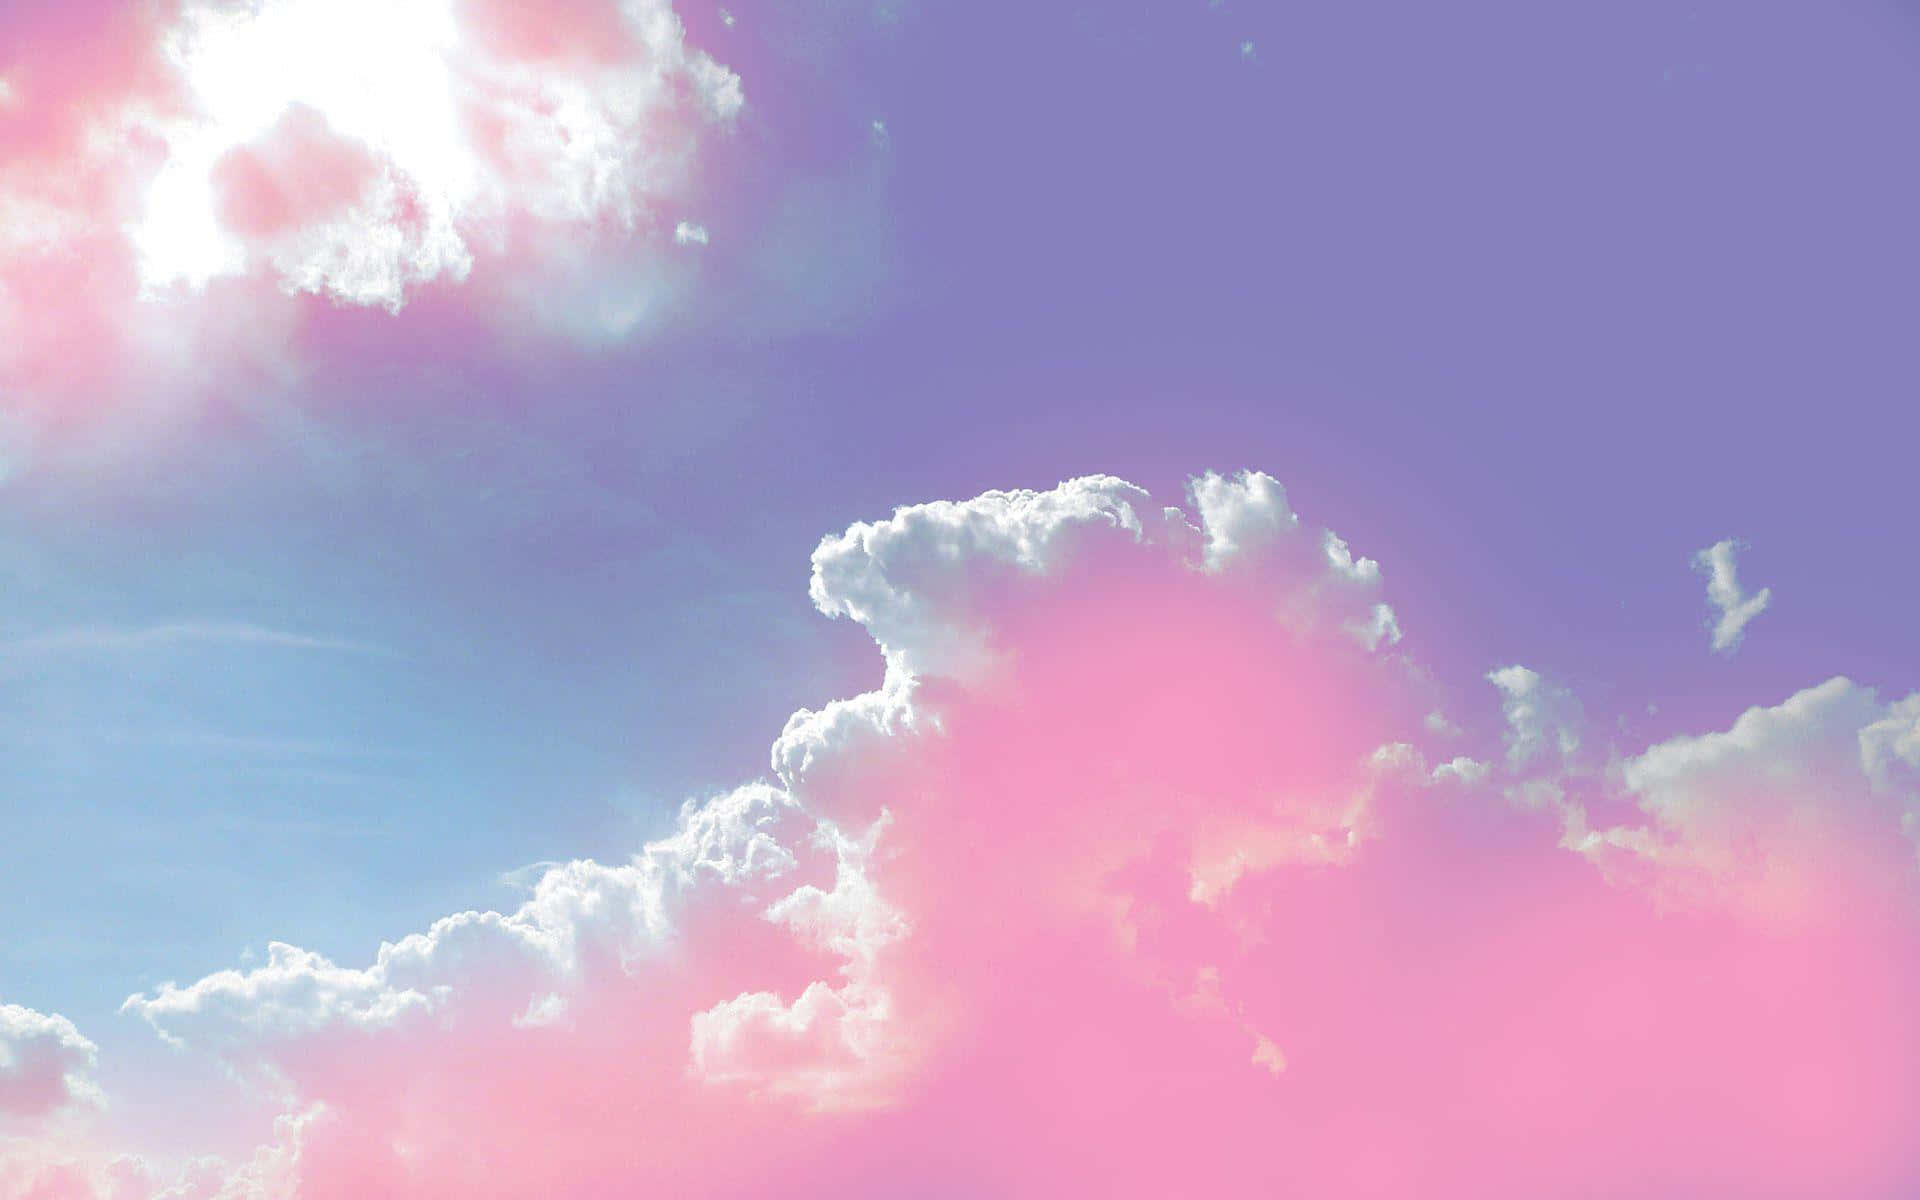 Find your inner peace in the aesthetic clouds that reflect hues of pink, blue, and yellow